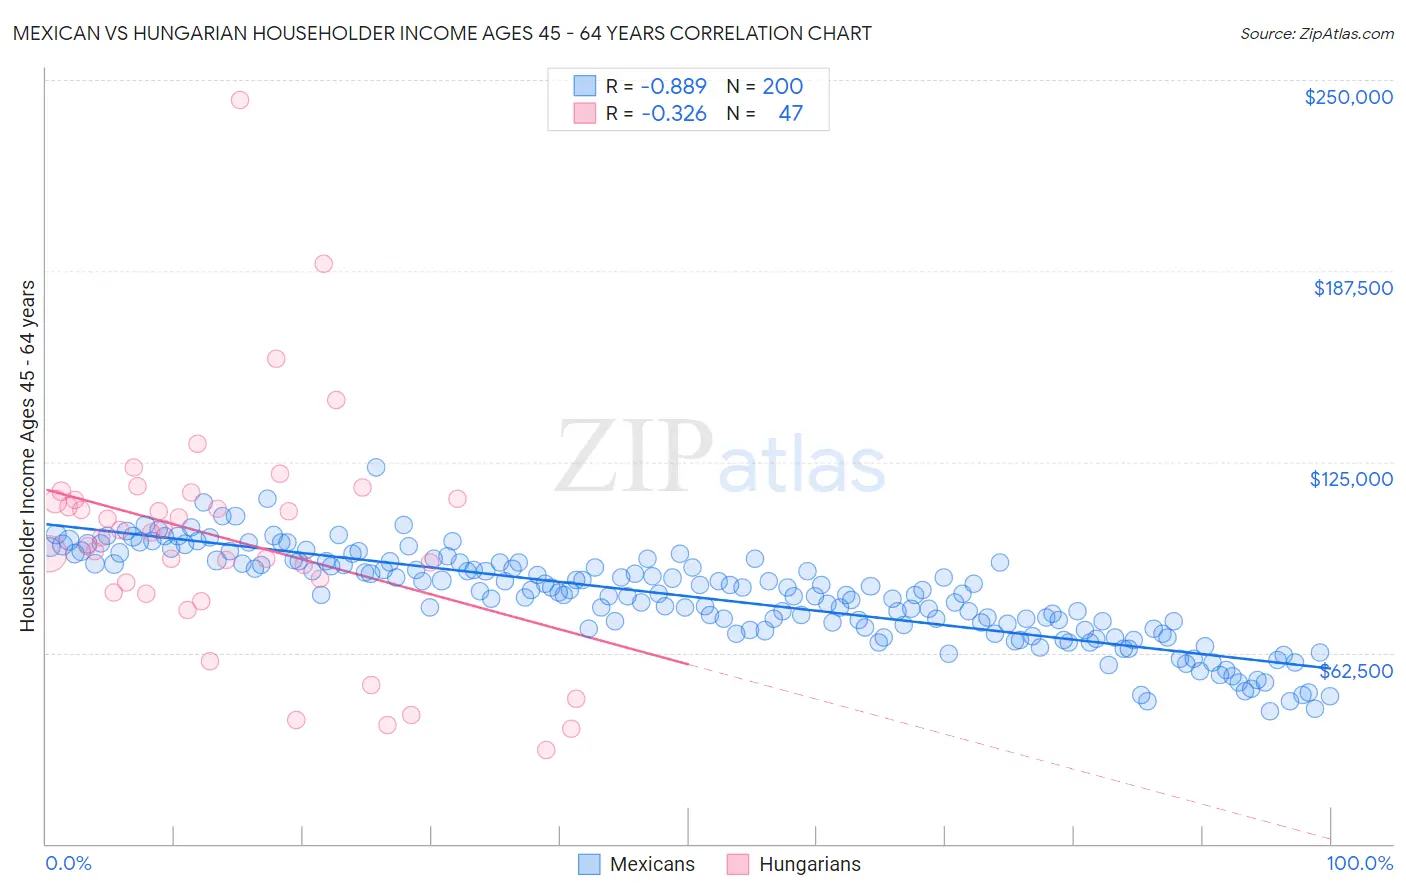 Mexican vs Hungarian Householder Income Ages 45 - 64 years